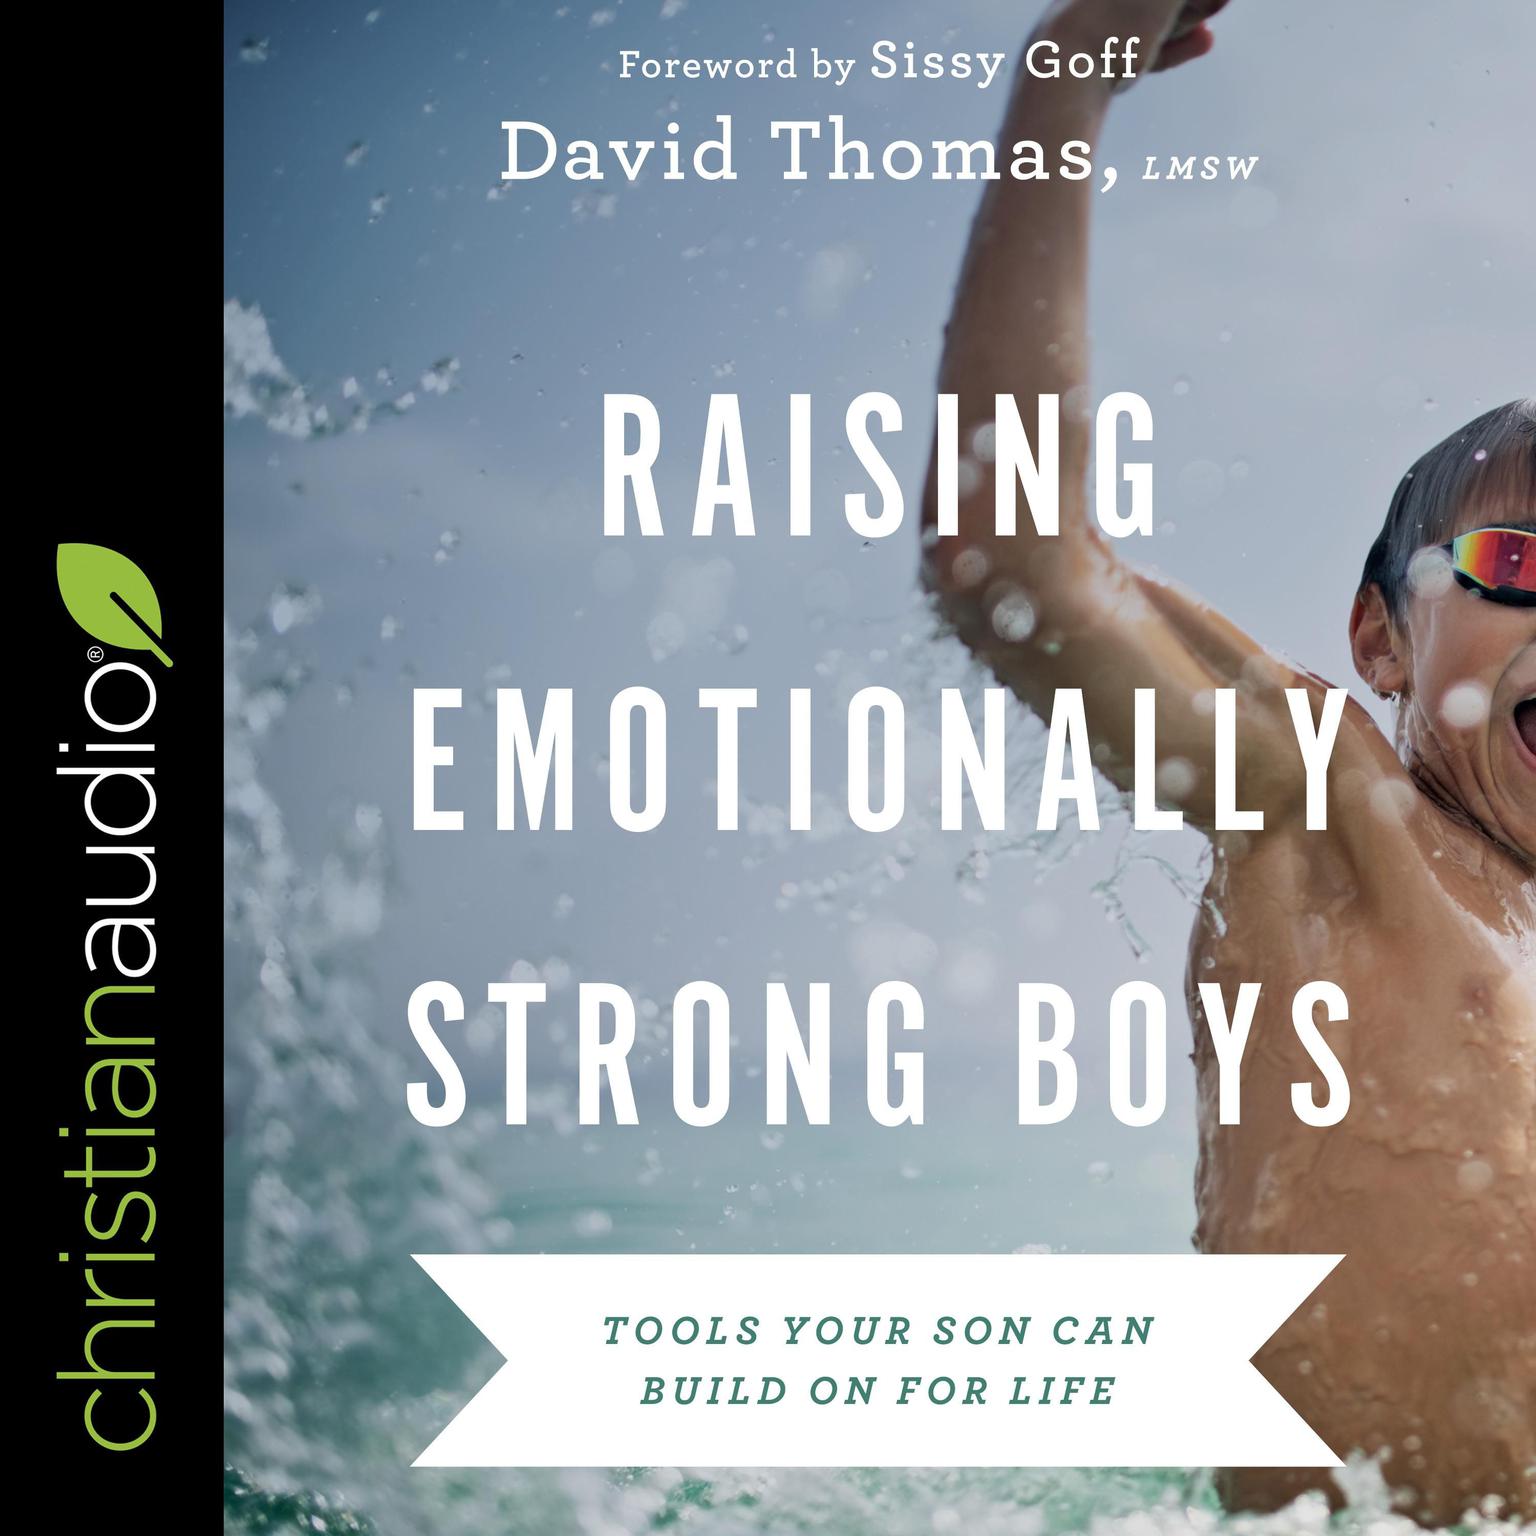 Raising Emotionally Strong Boys: Tools Your Son Can Build On for Life Audiobook, by David Thomas, LMSW